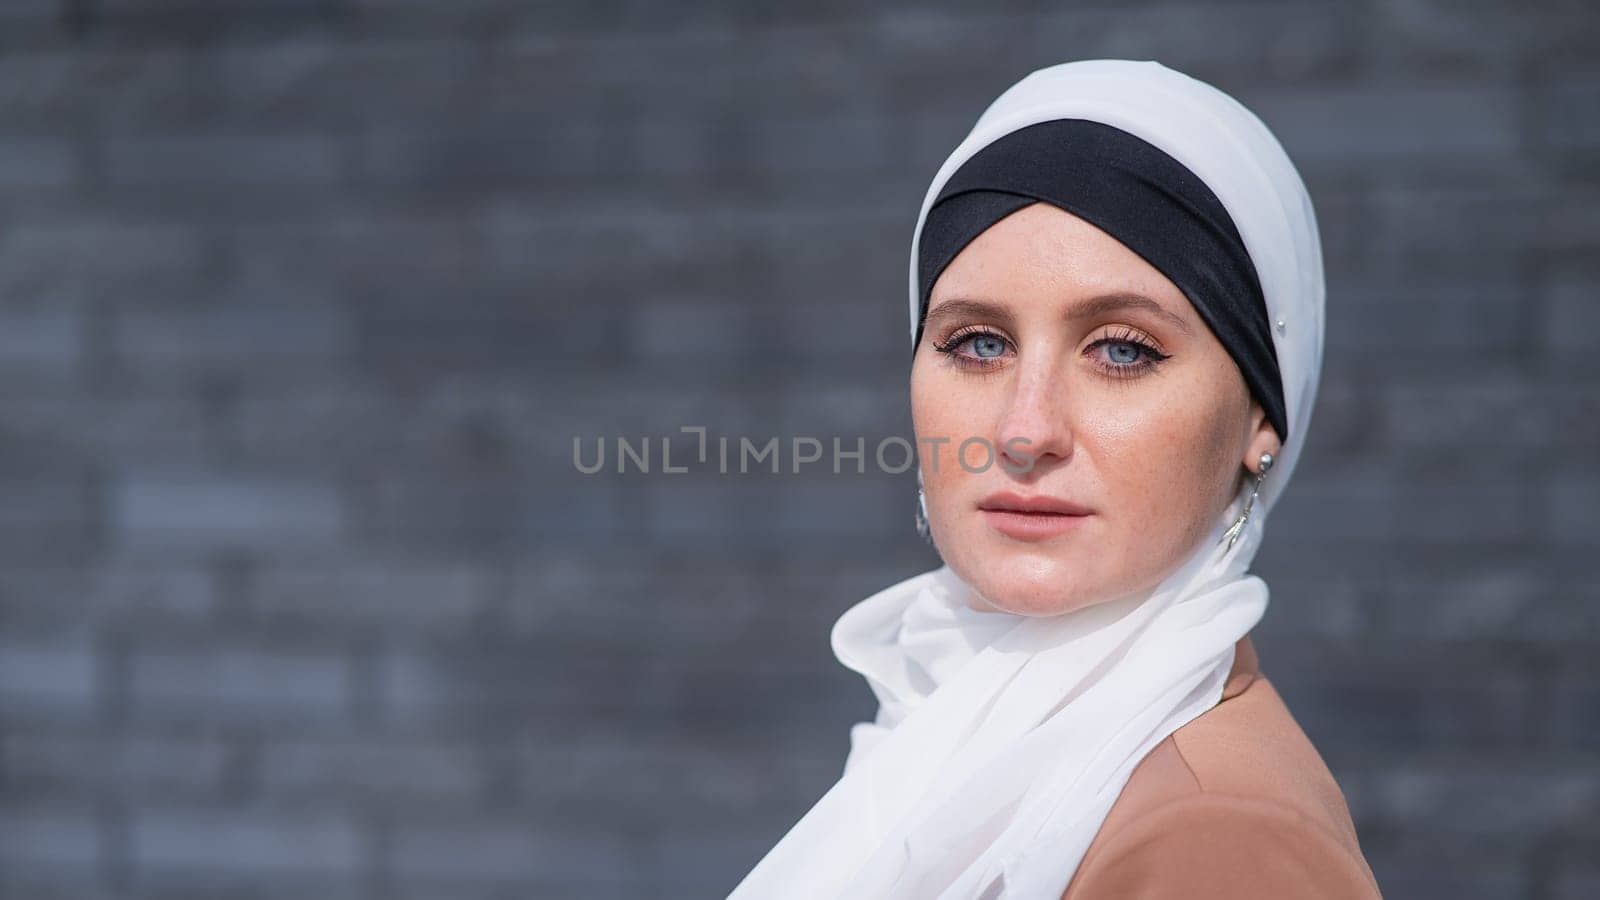 Portrait of a young blue-eyed woman in a hijab against a gray brick wall. by mrwed54